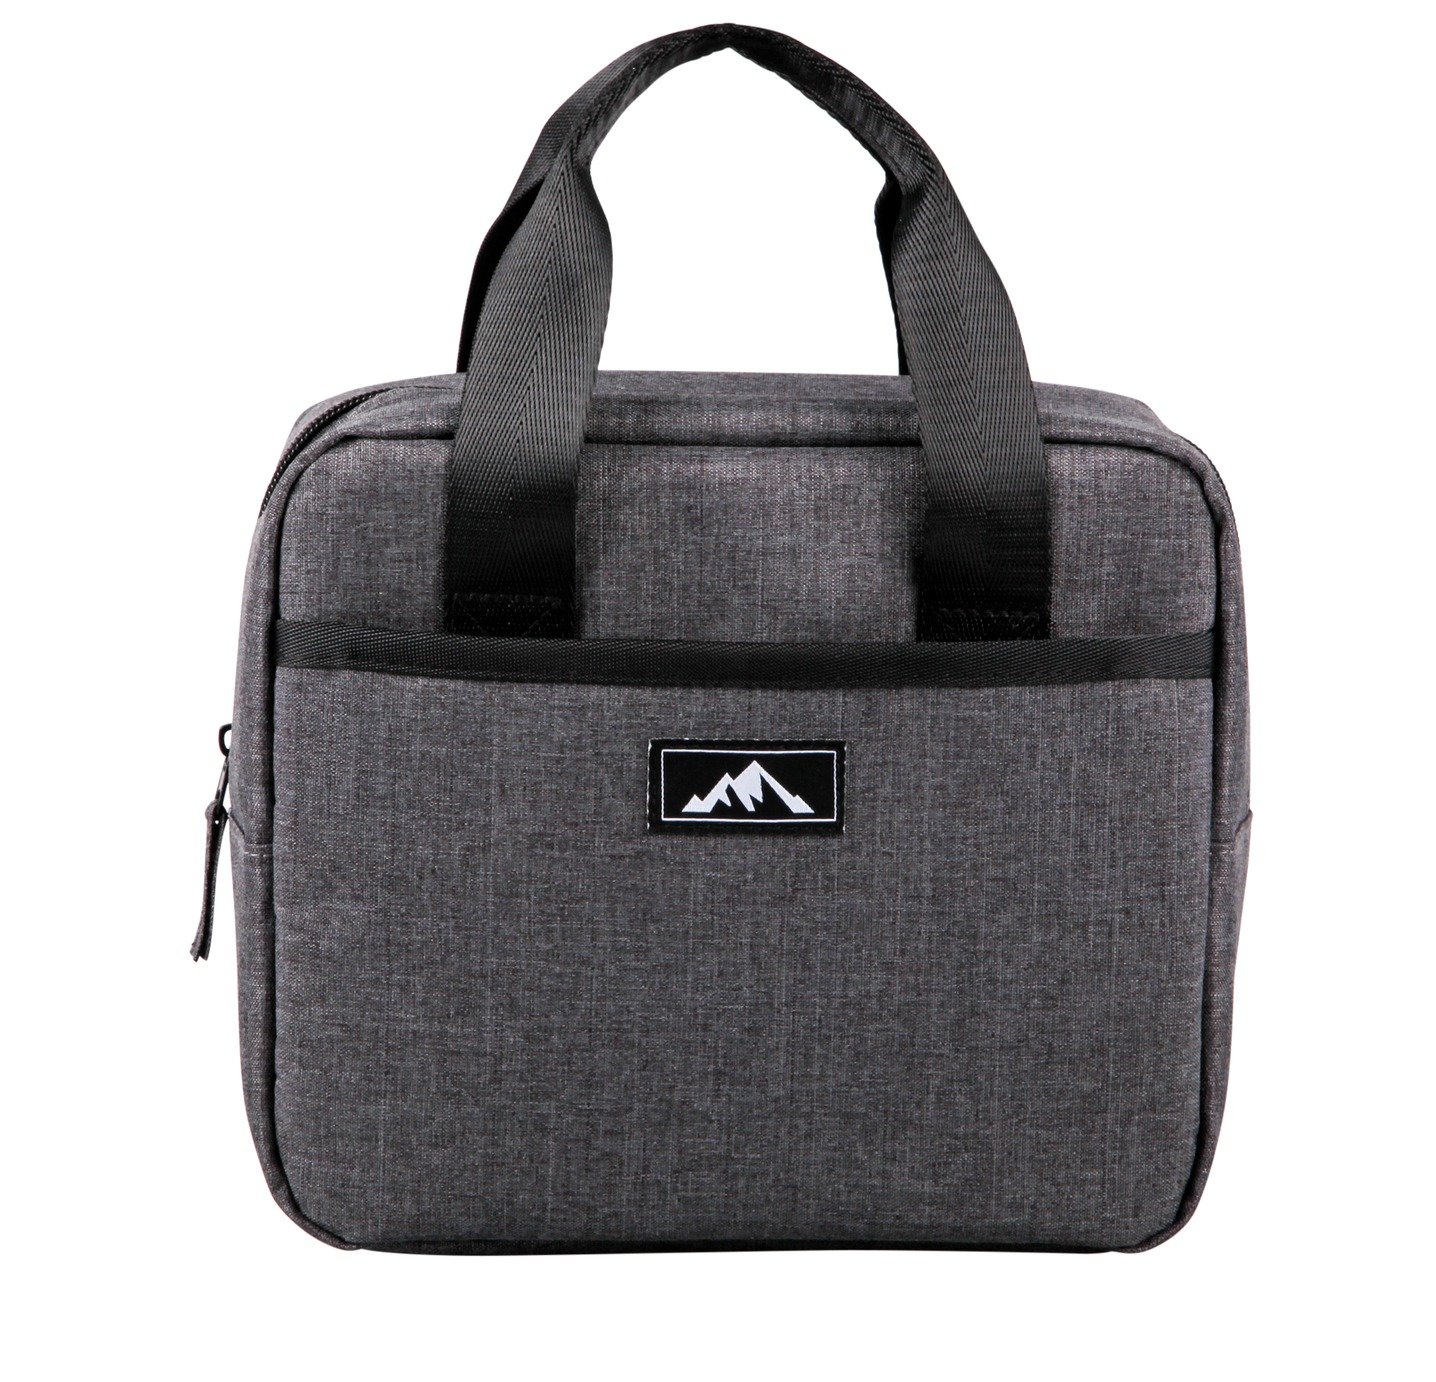 Home Slate Grey and Black Lunch Bag